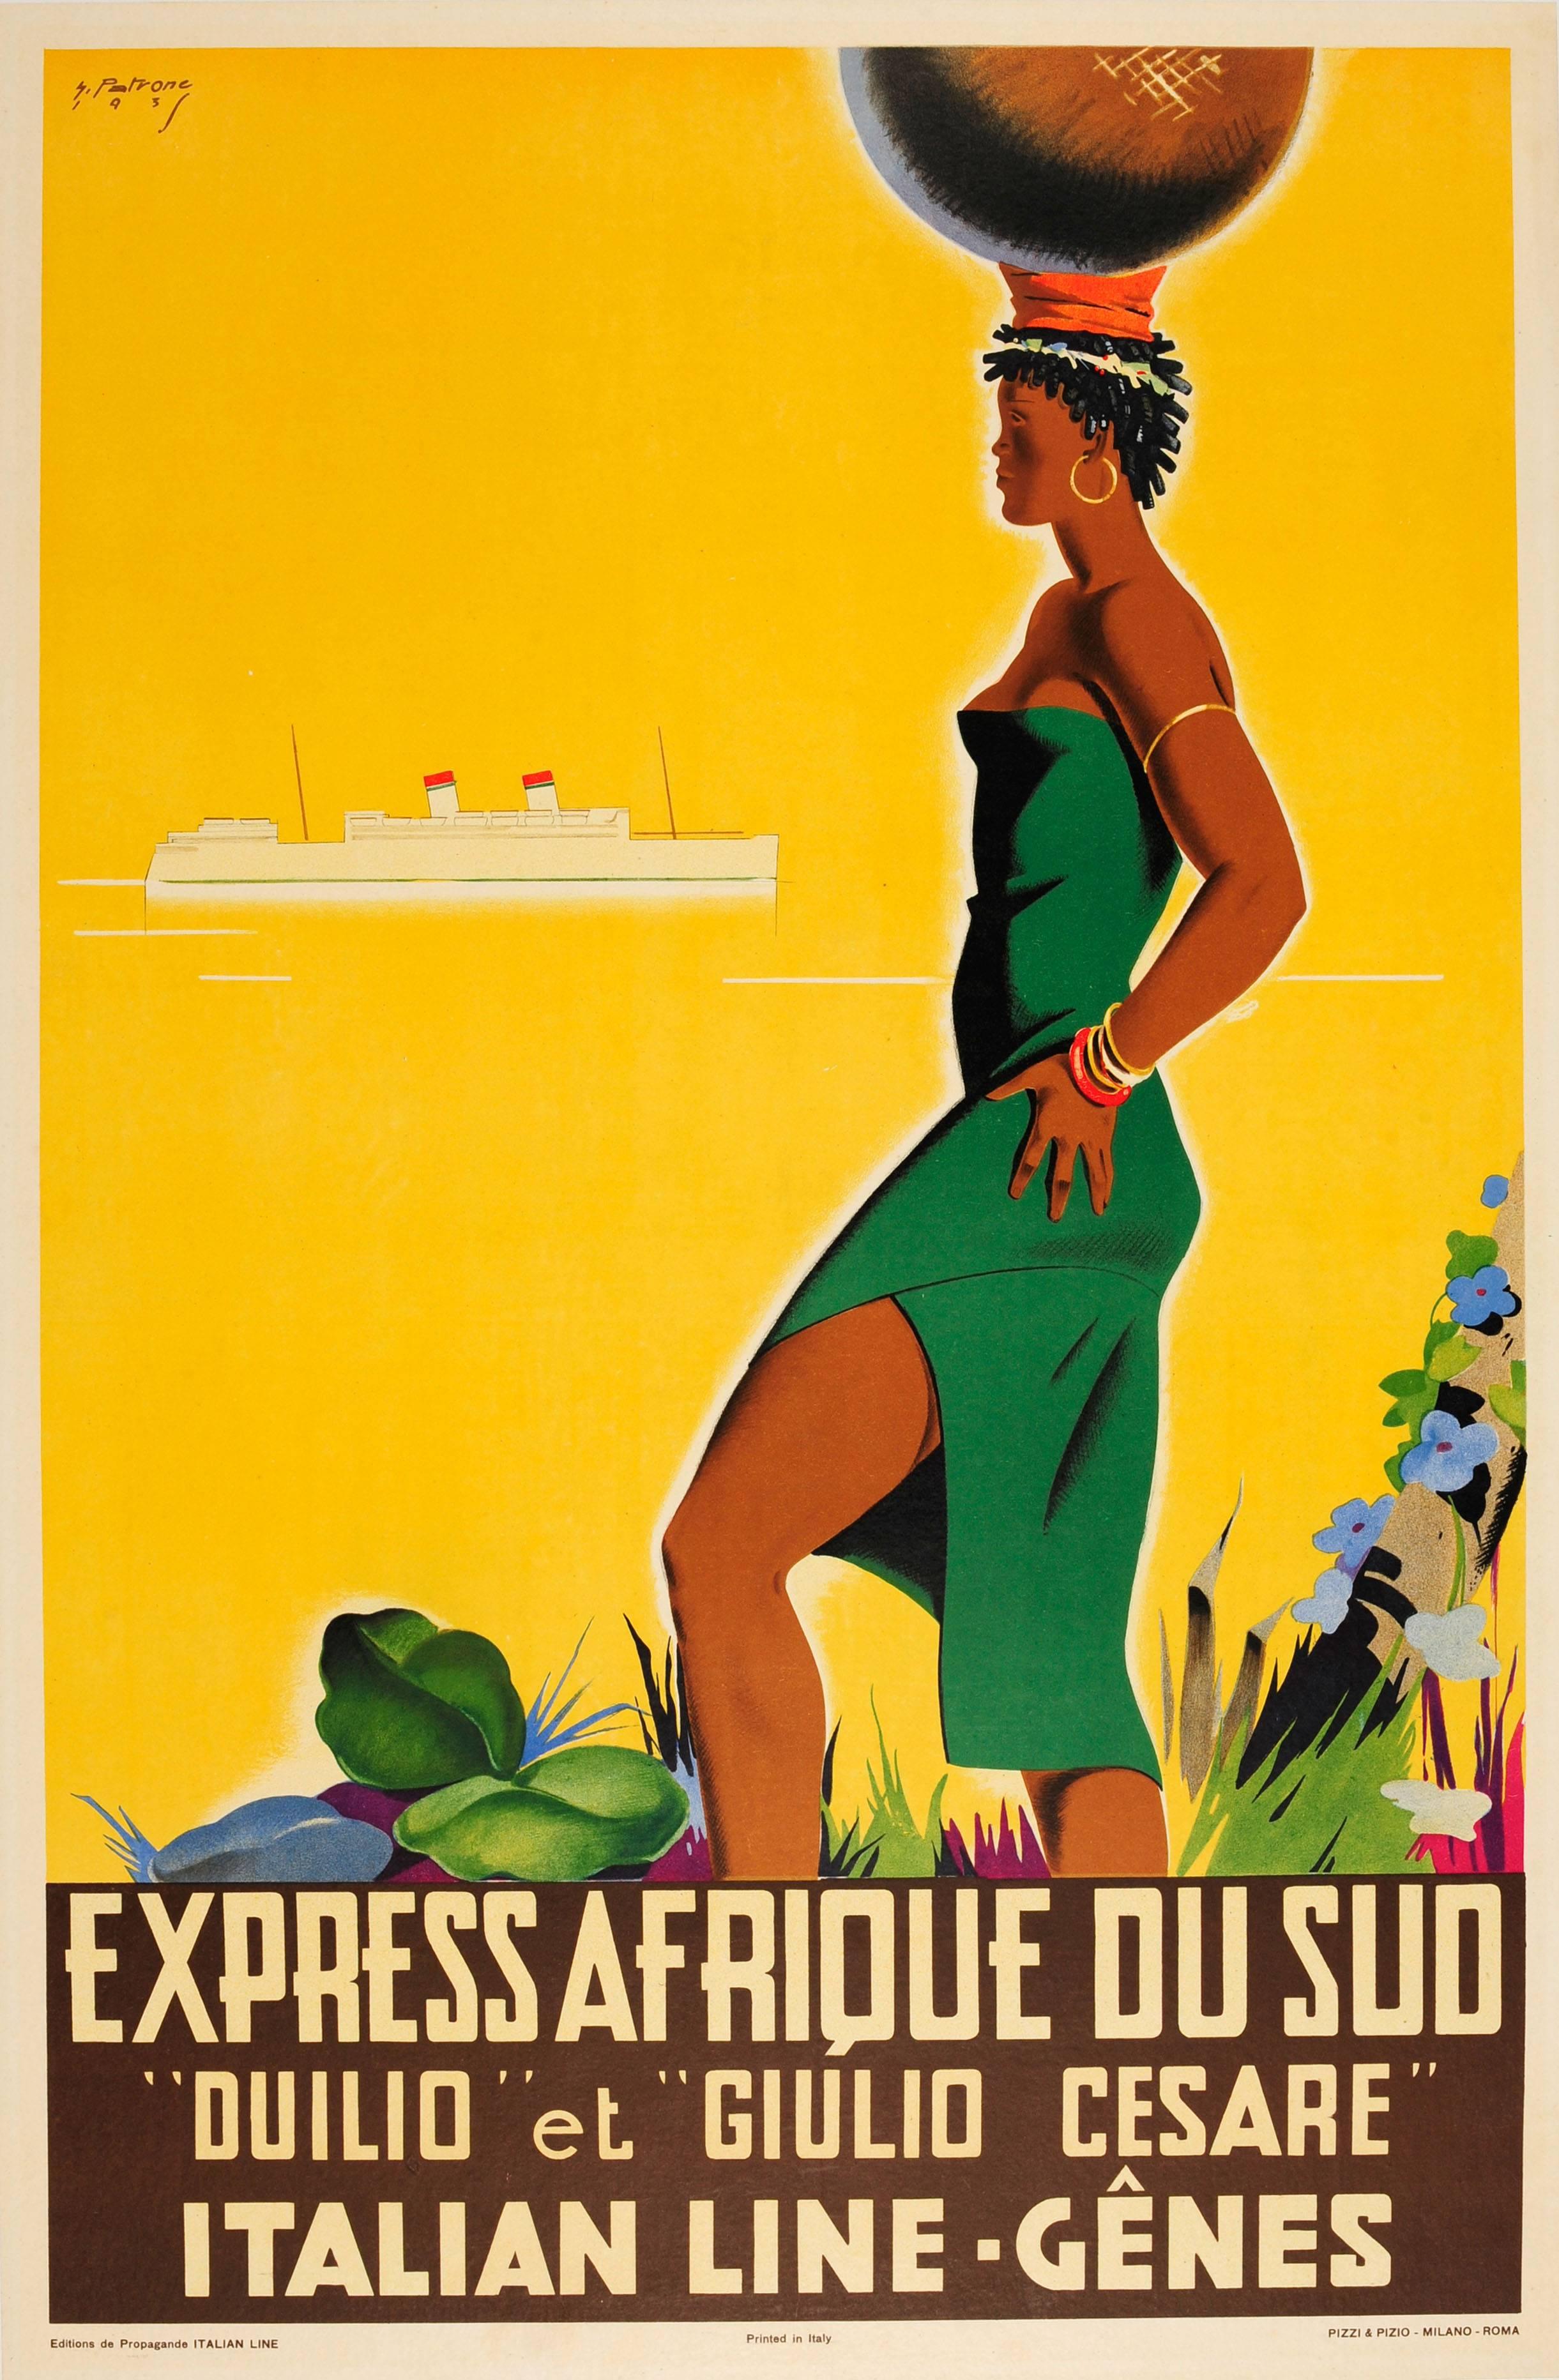 Giovanni Patrone Print - Original Italian Line Cruise Travel Poster For South Africa By Express Steamship